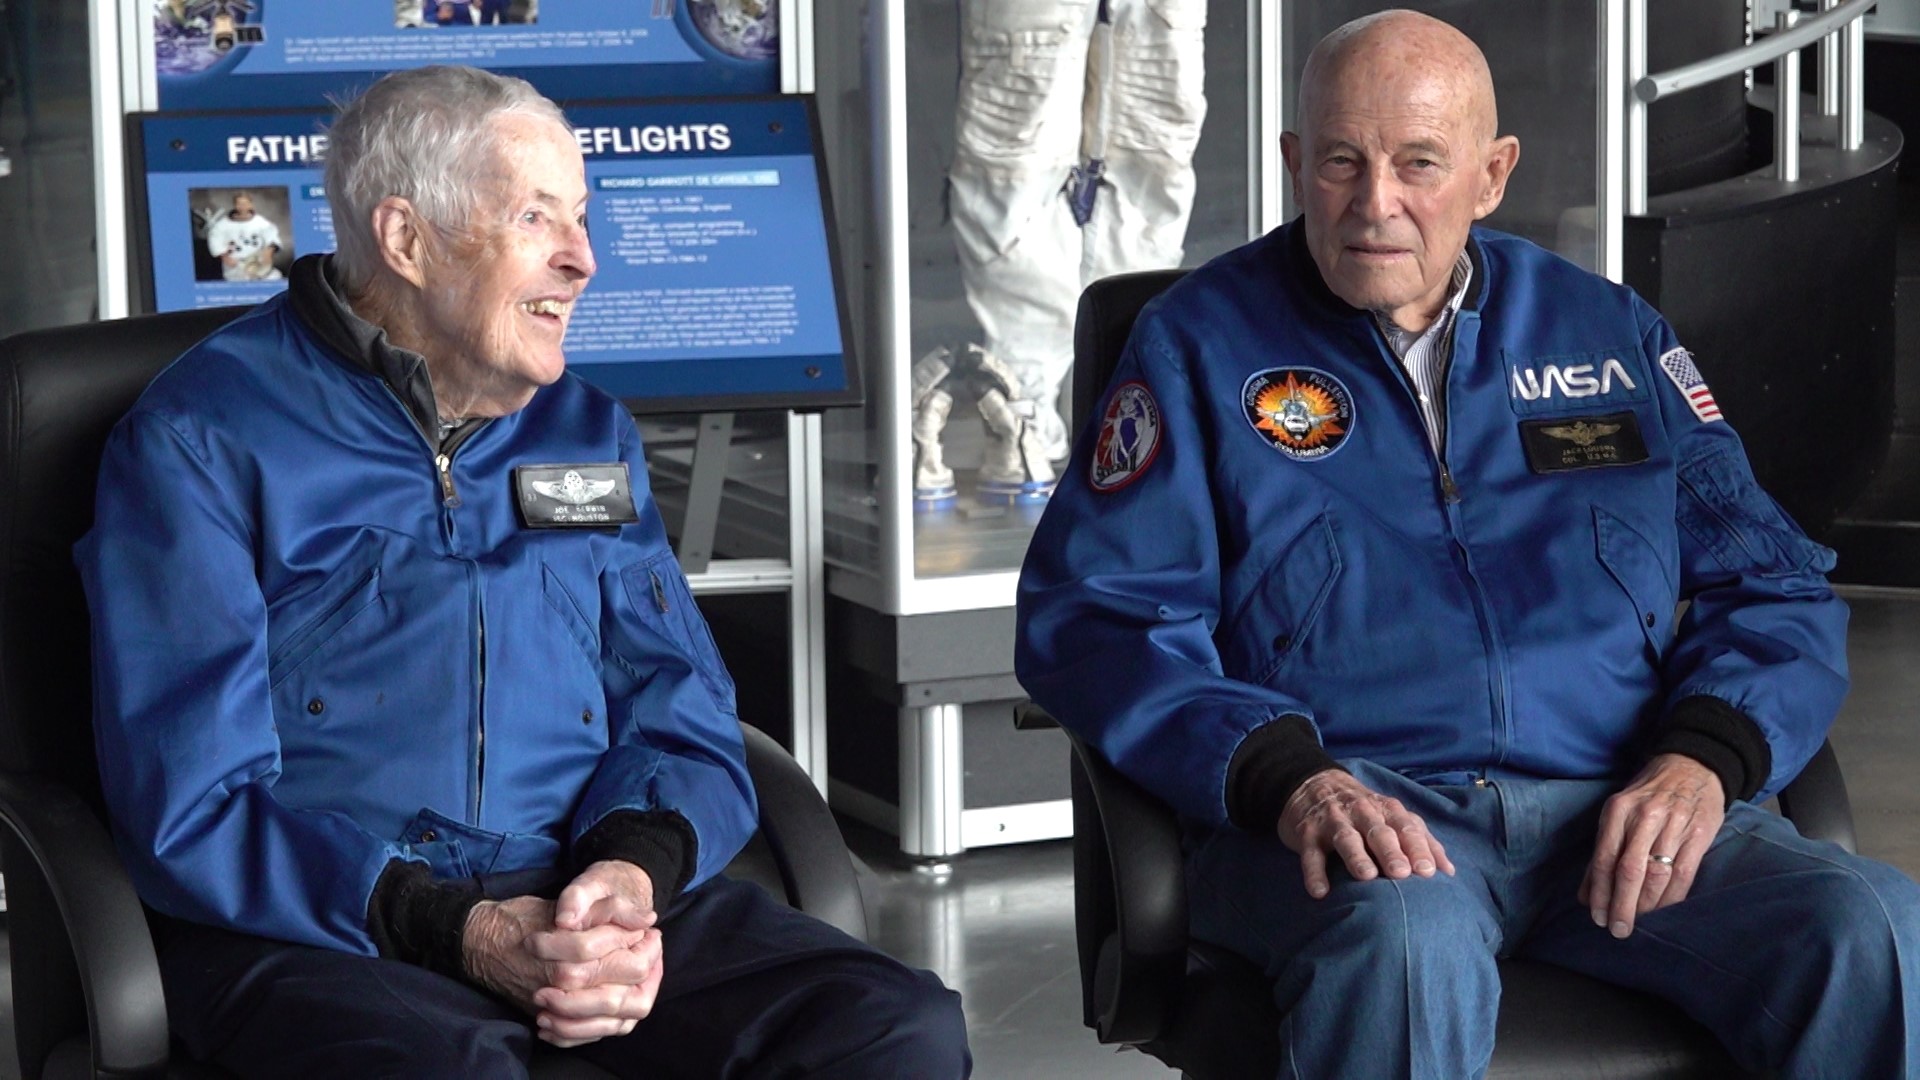 50 years ago, America's first space station blasted off. Two of its astronauts reunited in Huntsville.